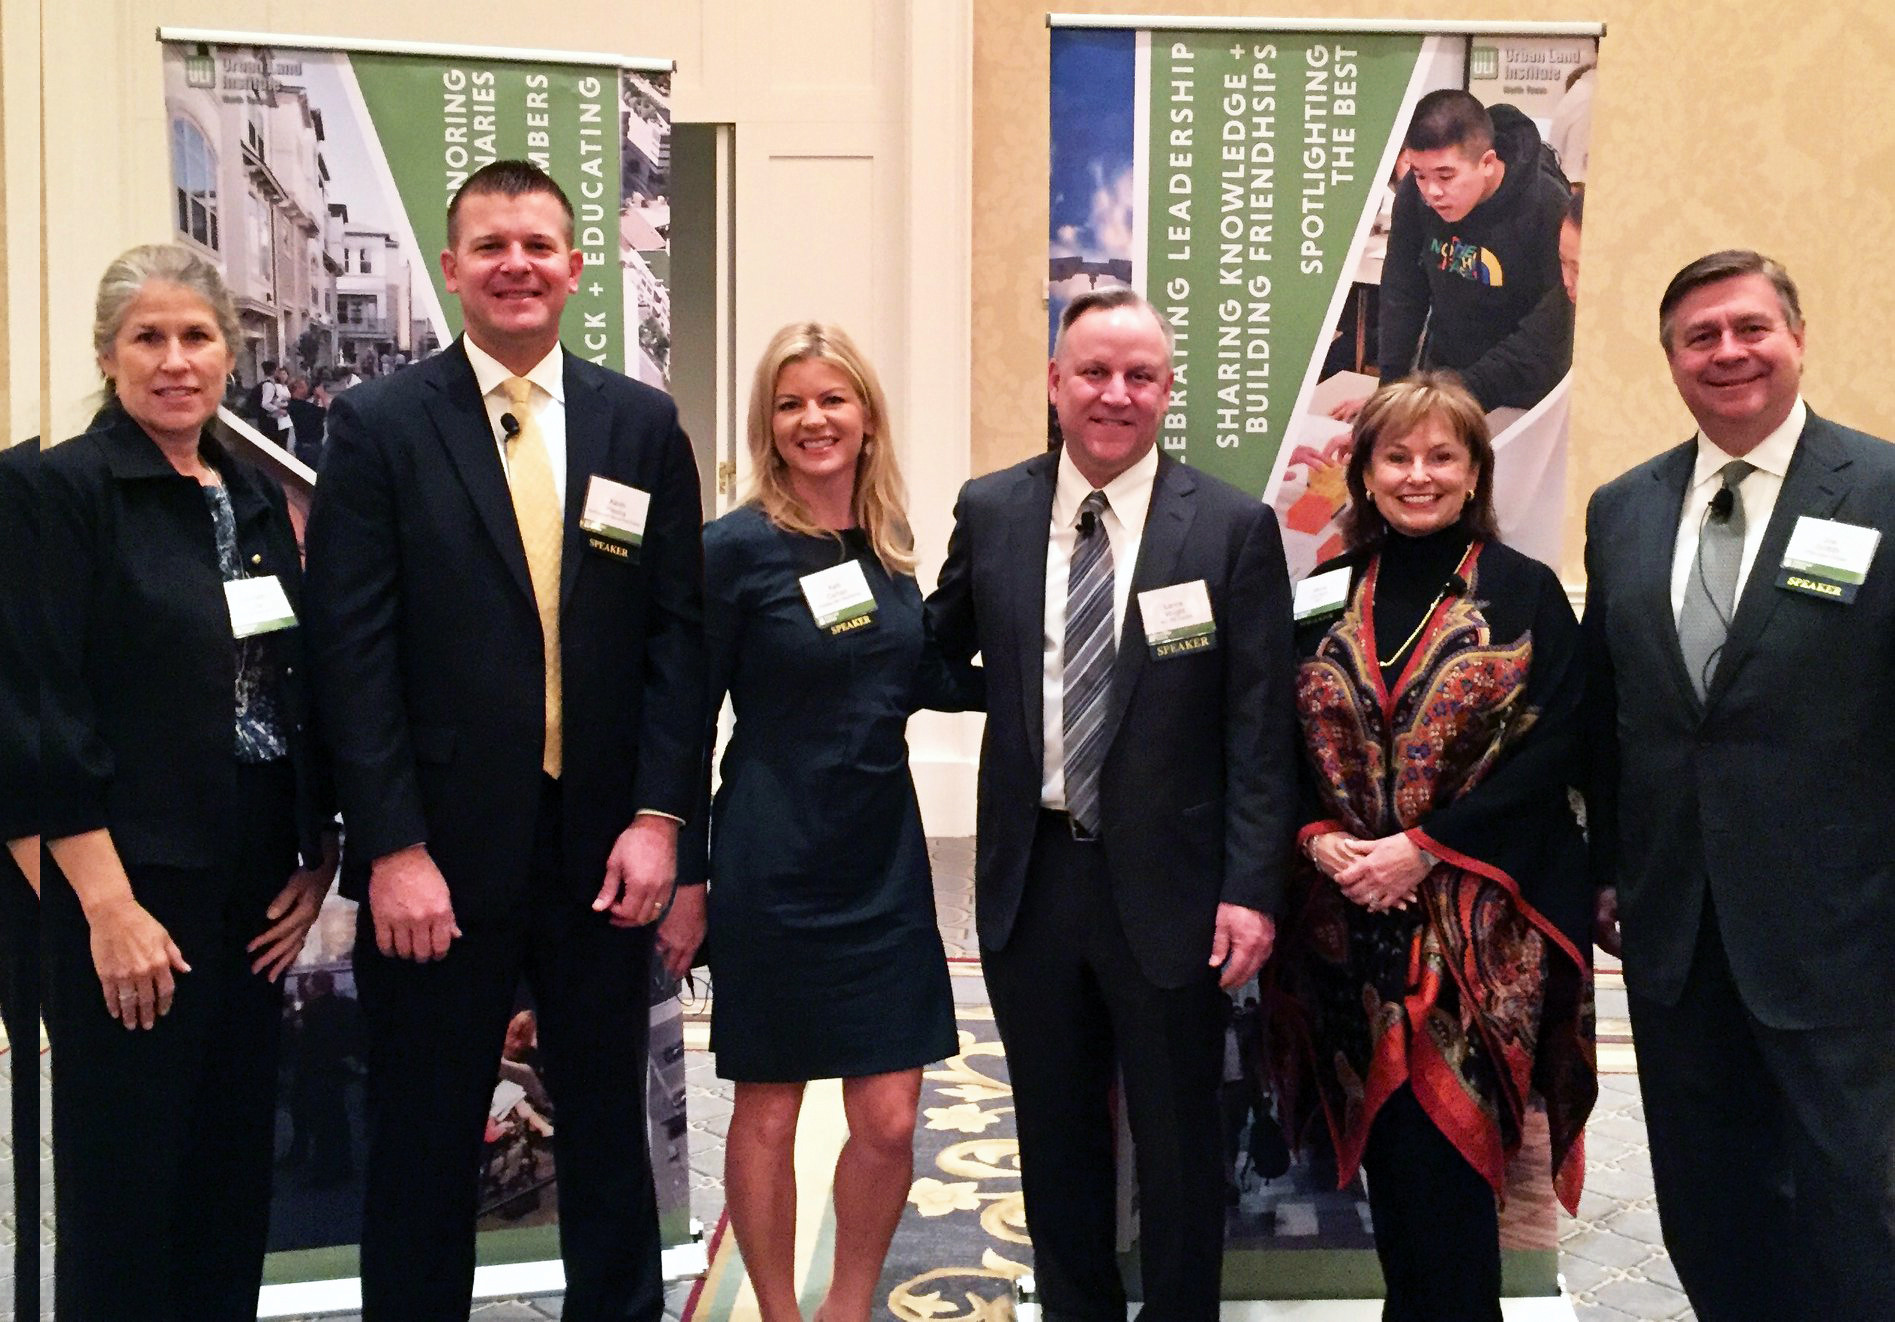 ULI North Texas welcomed the Urban Land Institute Americas President, Gwyenth Coté — at Belo Mansion.